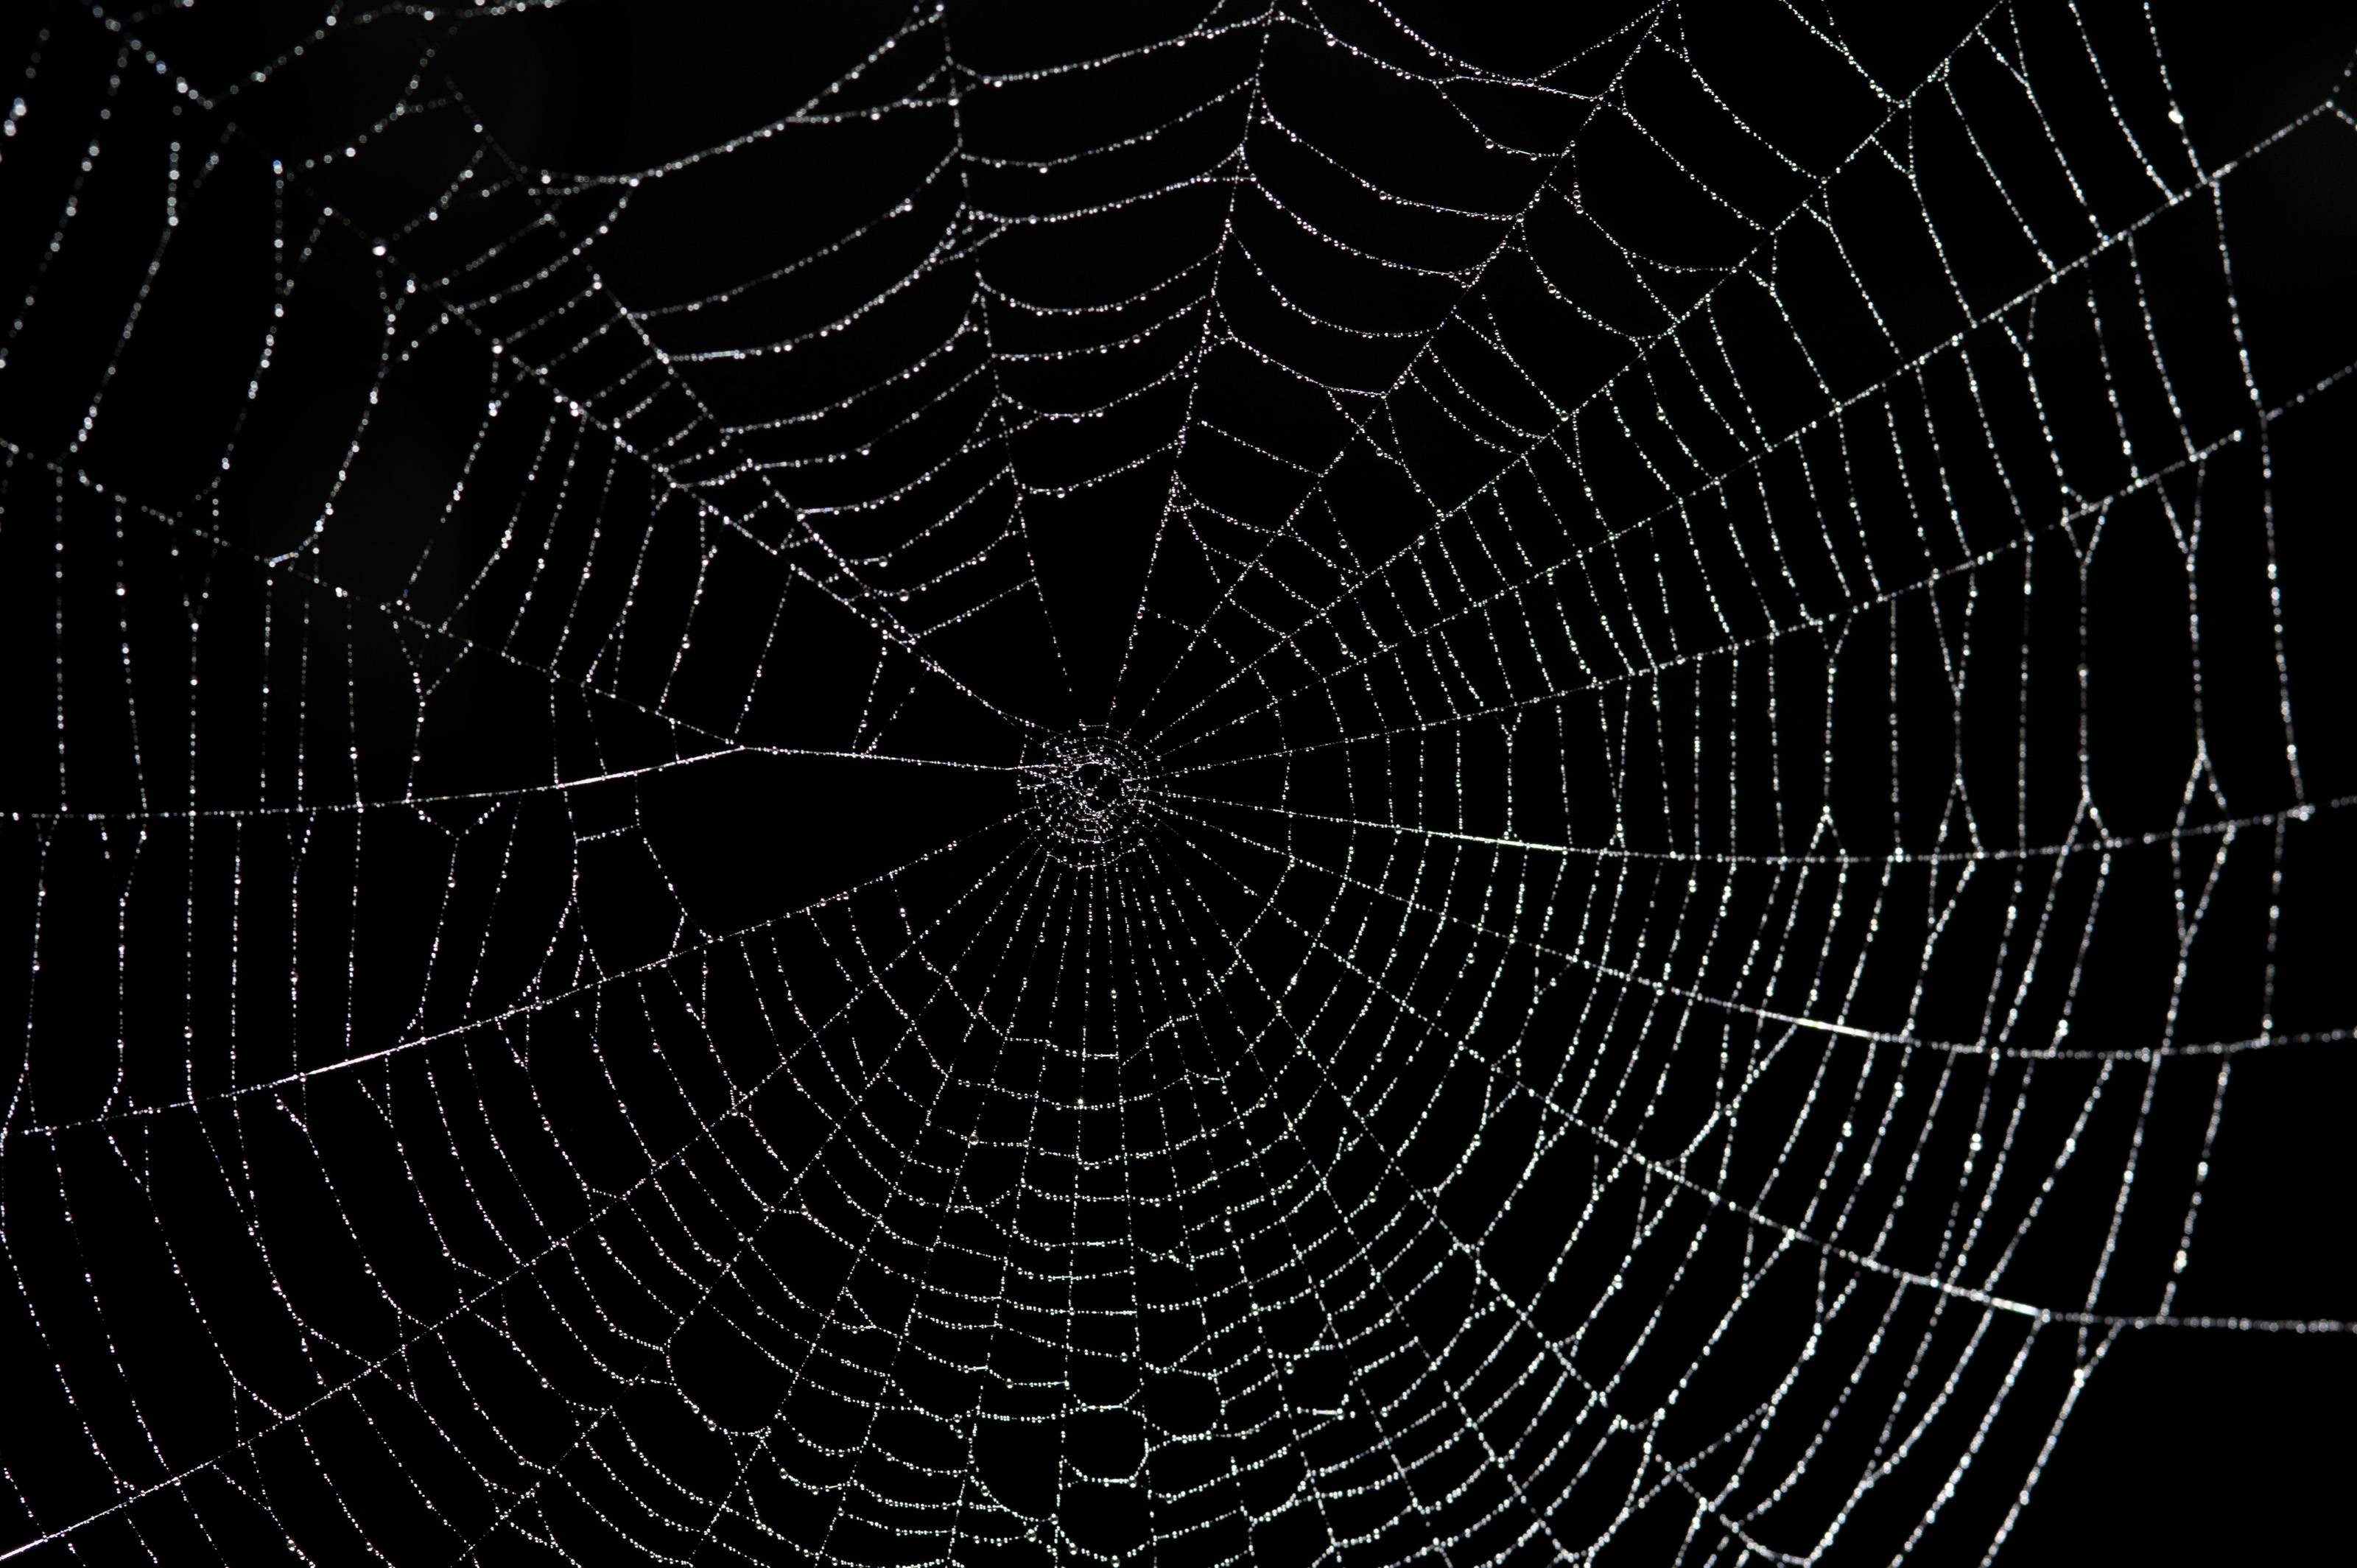 3200x2129 Large spider web-8147 | Stockarch